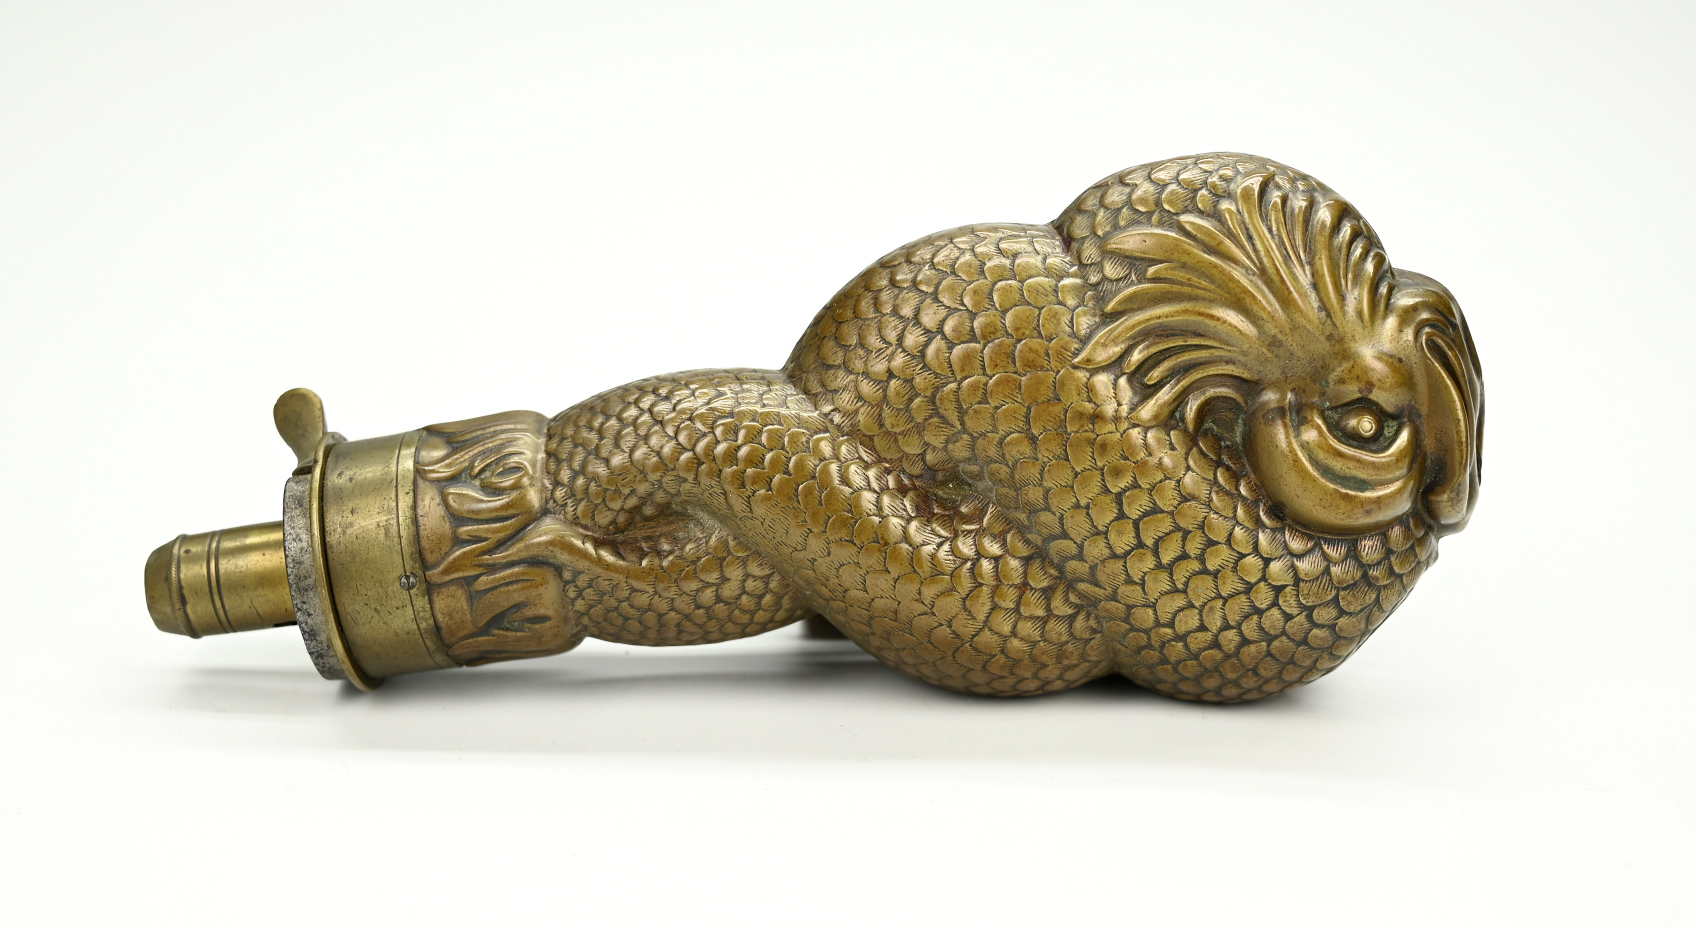 STRIKING, IMAGINATIVE DOUBLE-ENTWINED SEA SERPENT OR DOLPHIN FLASK BY BARTRAM & CO. 